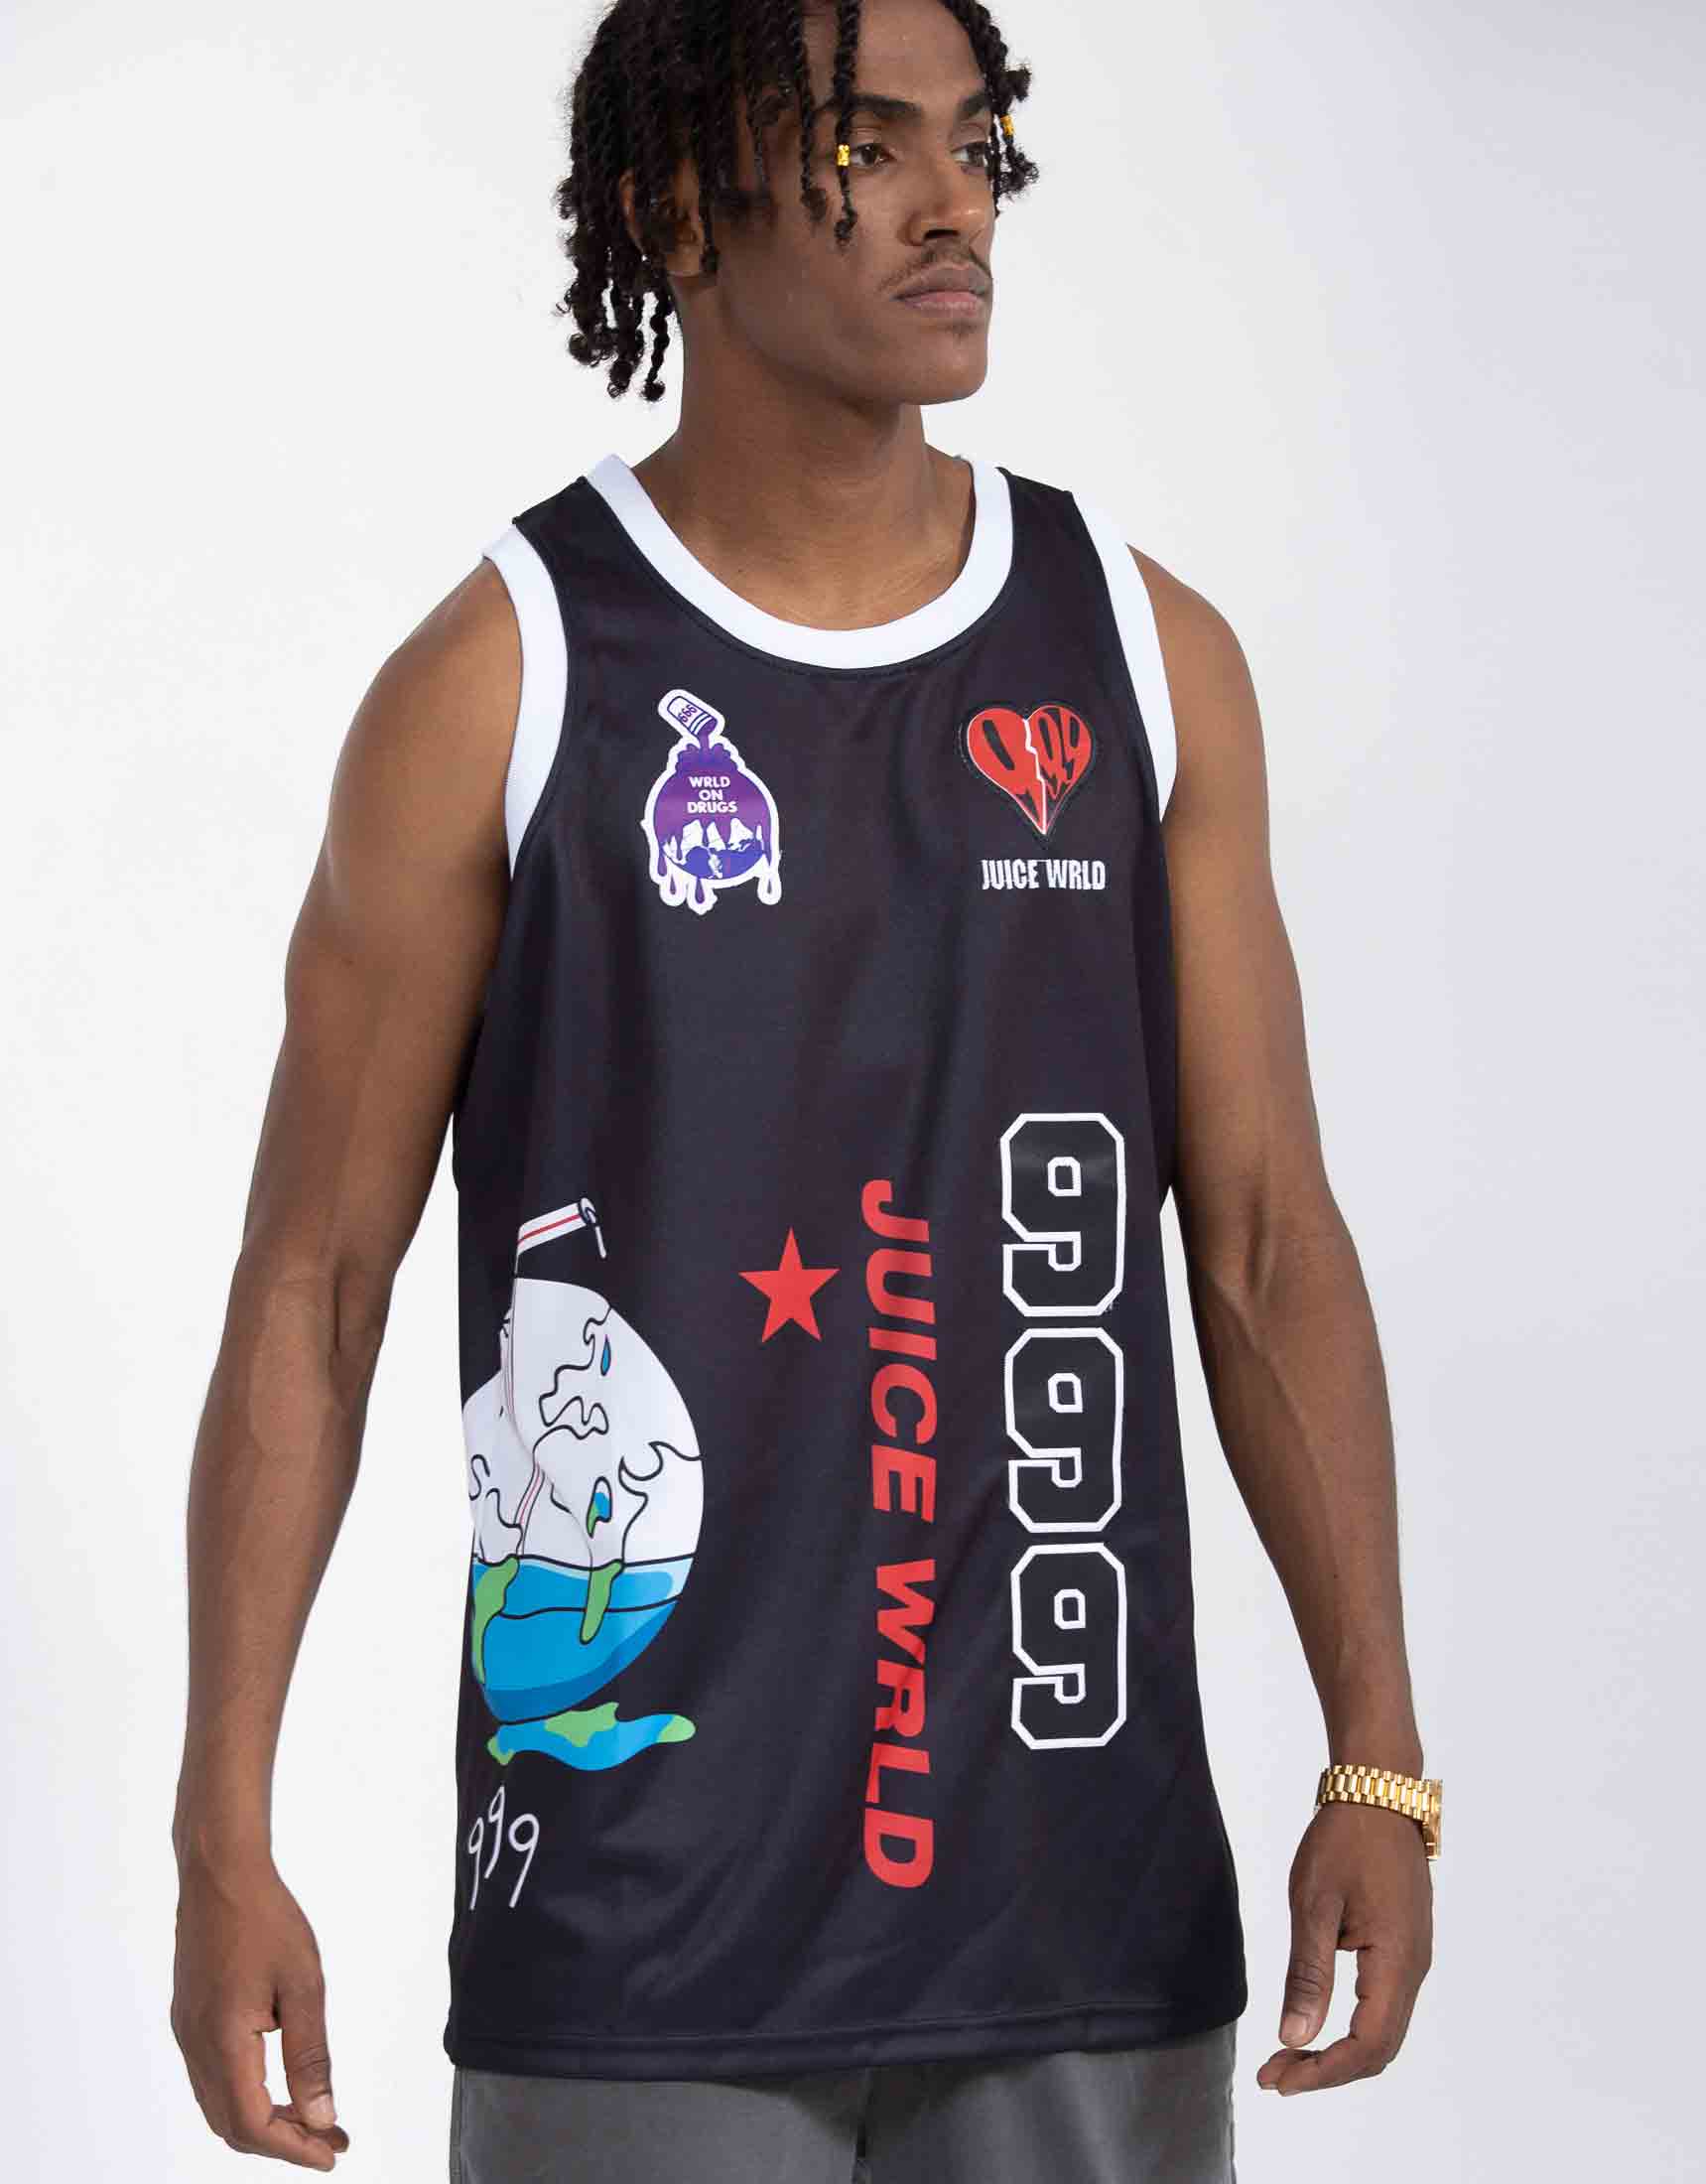 Juicy Wrld 999 Tribute Edition Basketball Jersey – 99Jersey®: Your